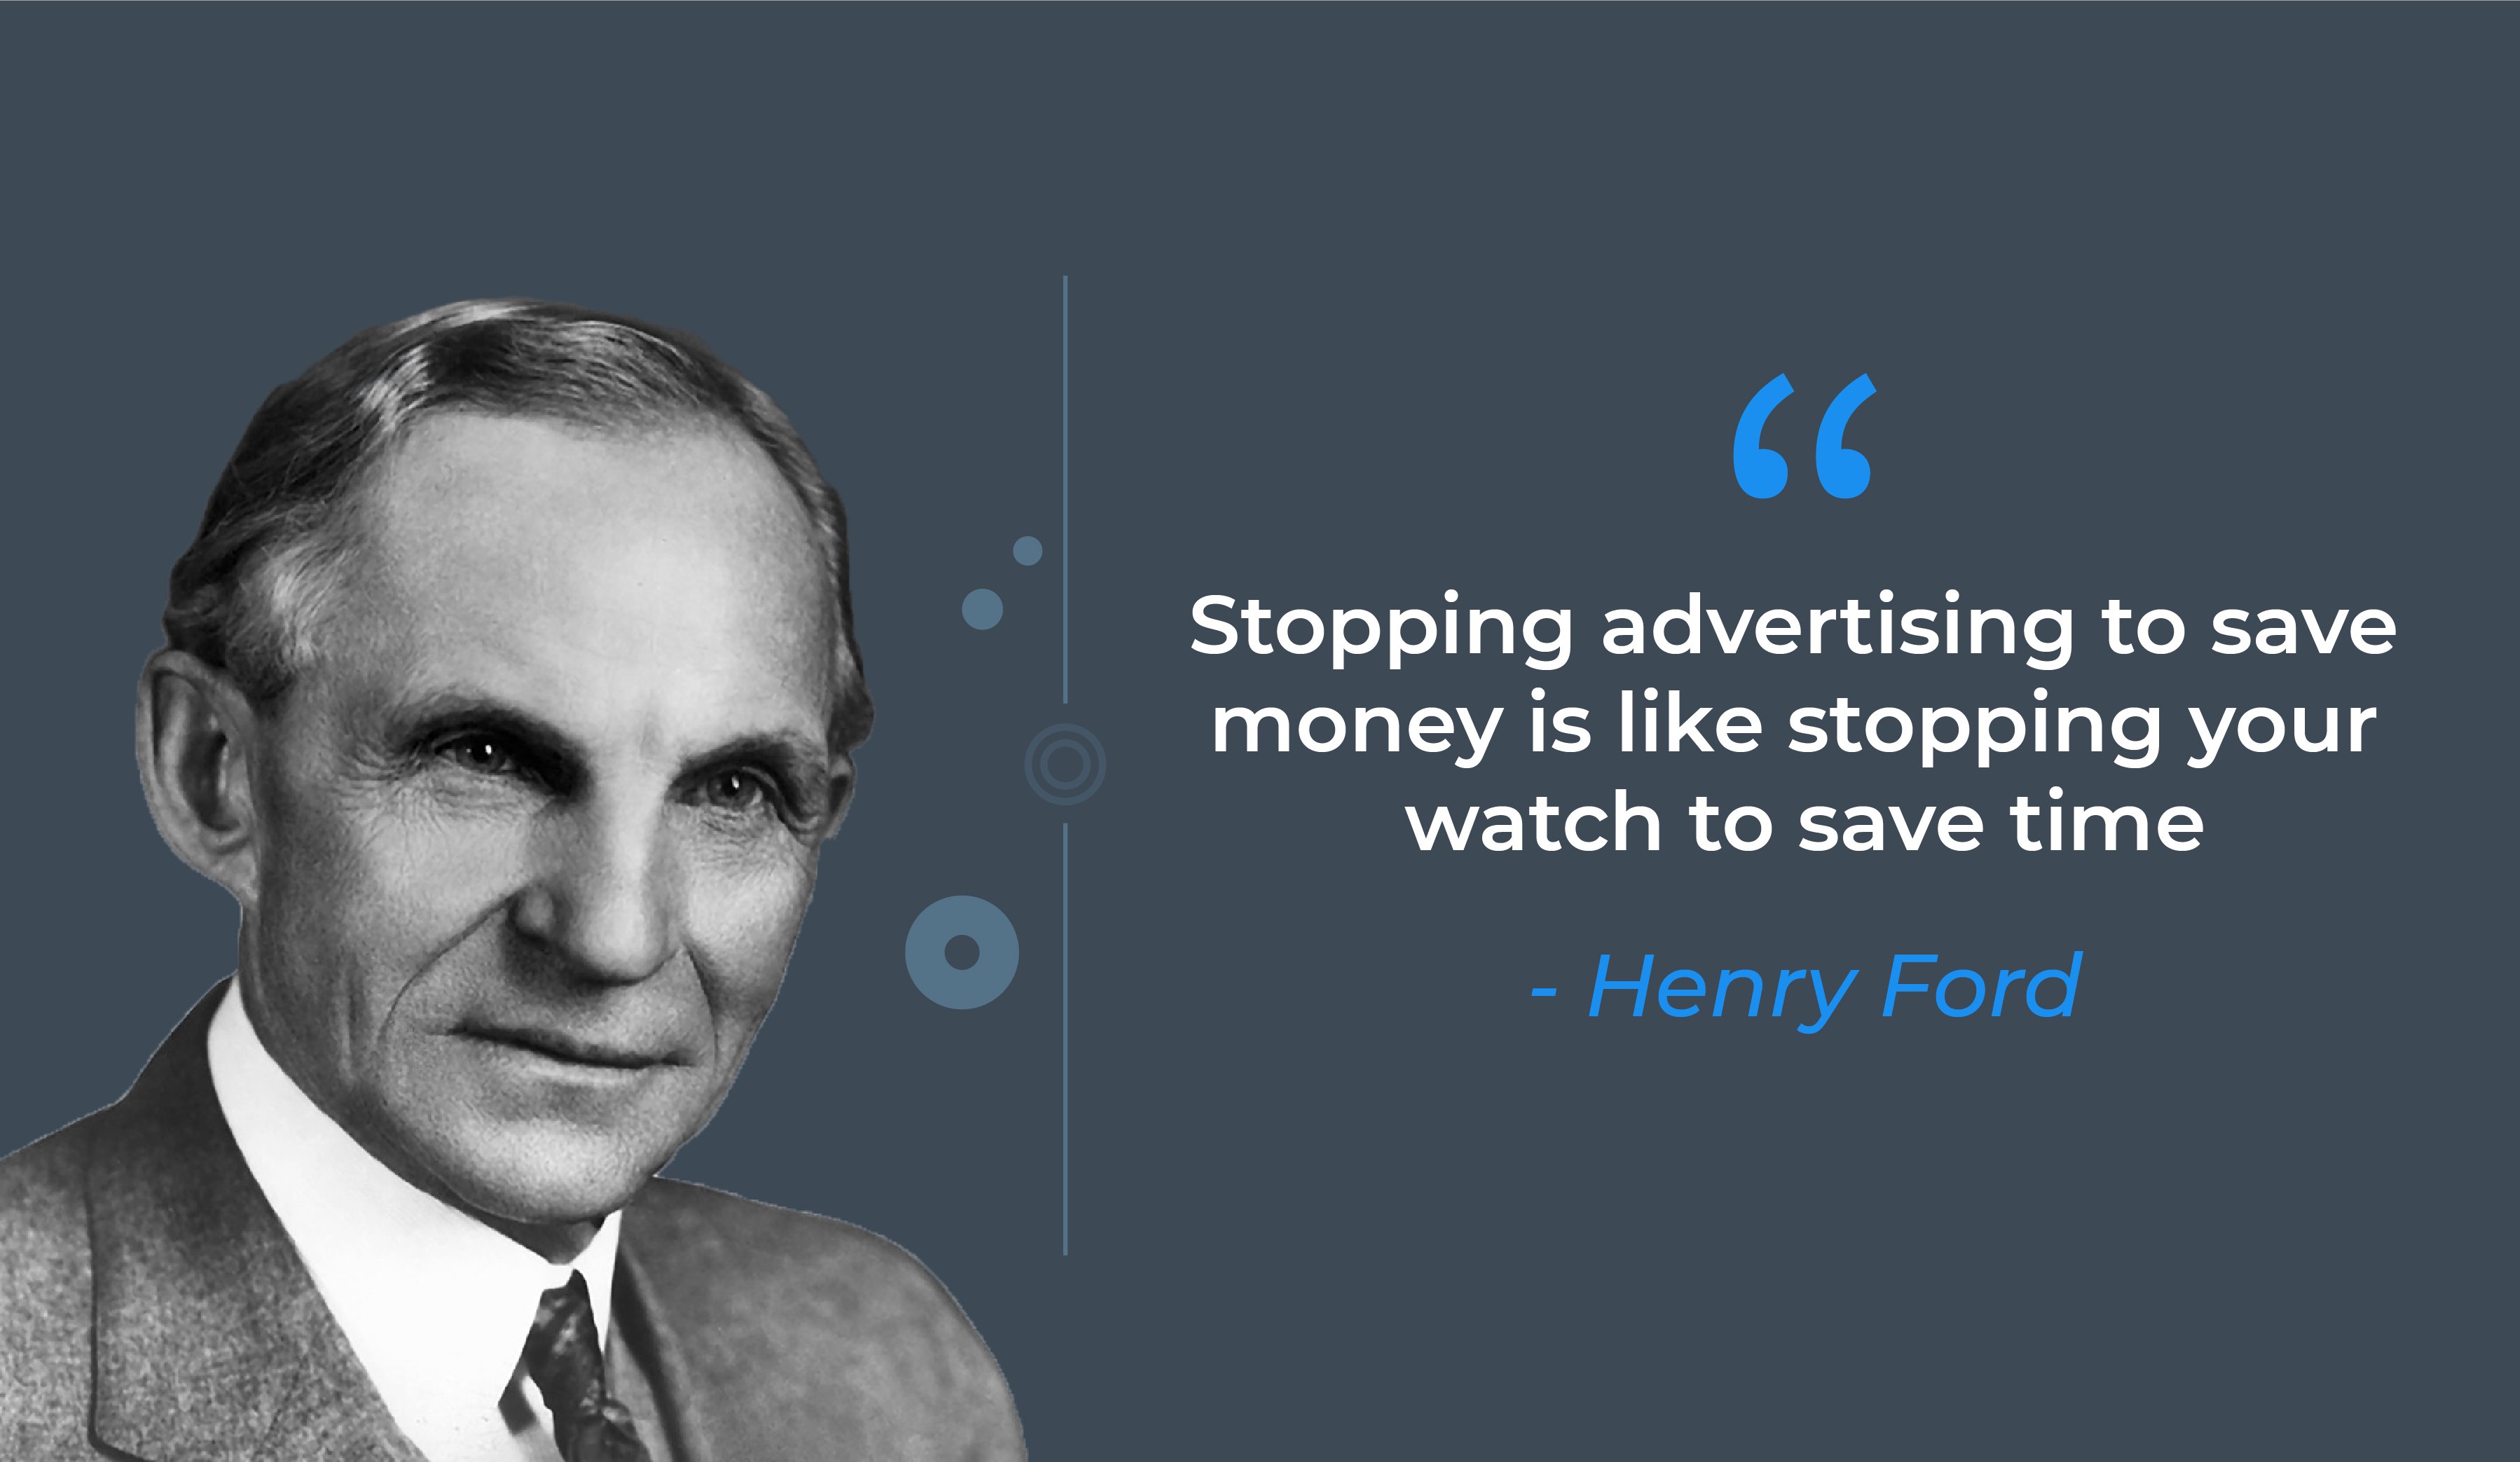 importance of advertising henry ford